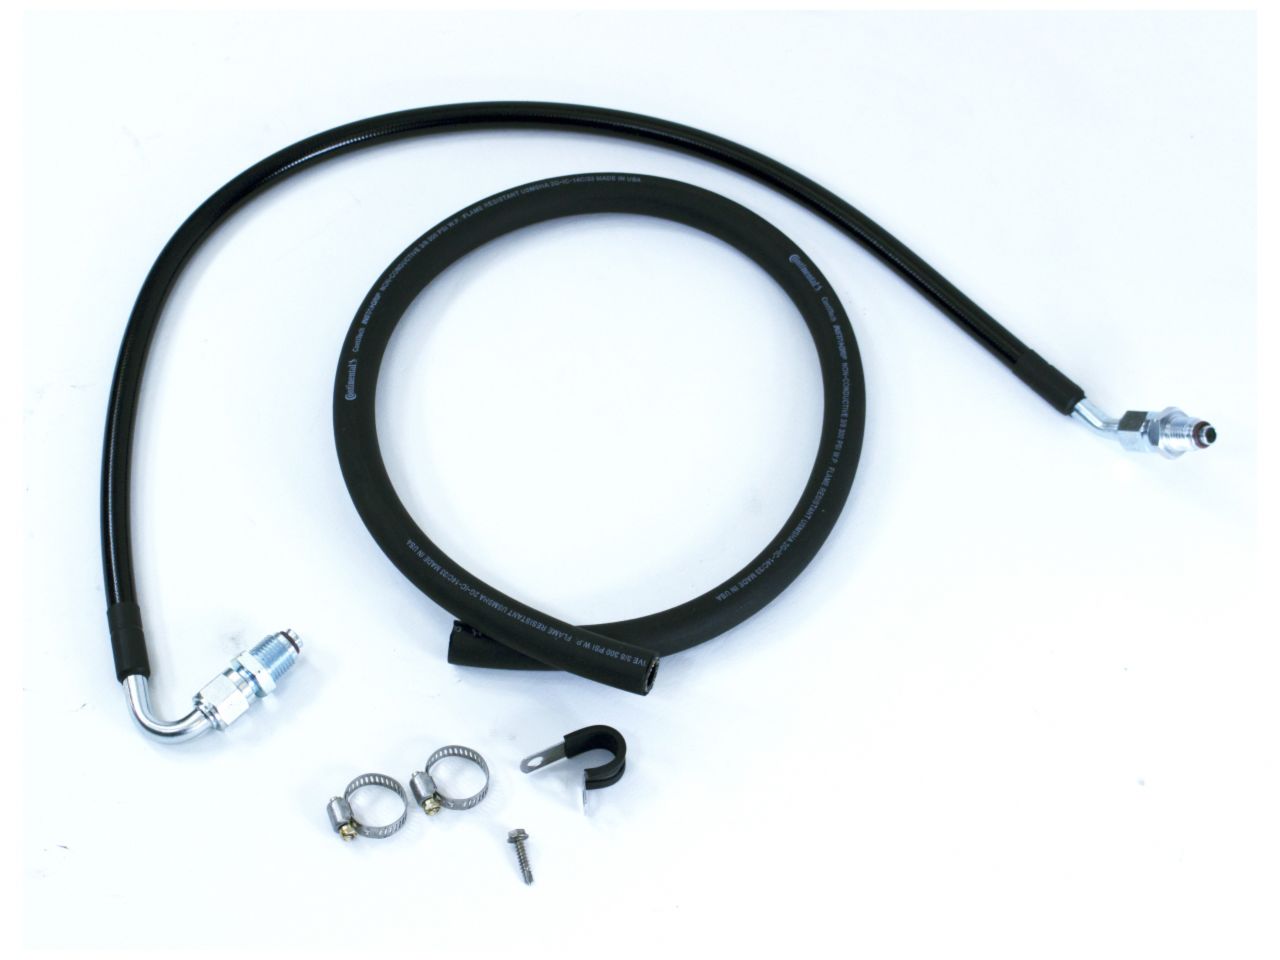 Sikky Mazda RX7 FD LHD LS Swap Power Steering Line Kit